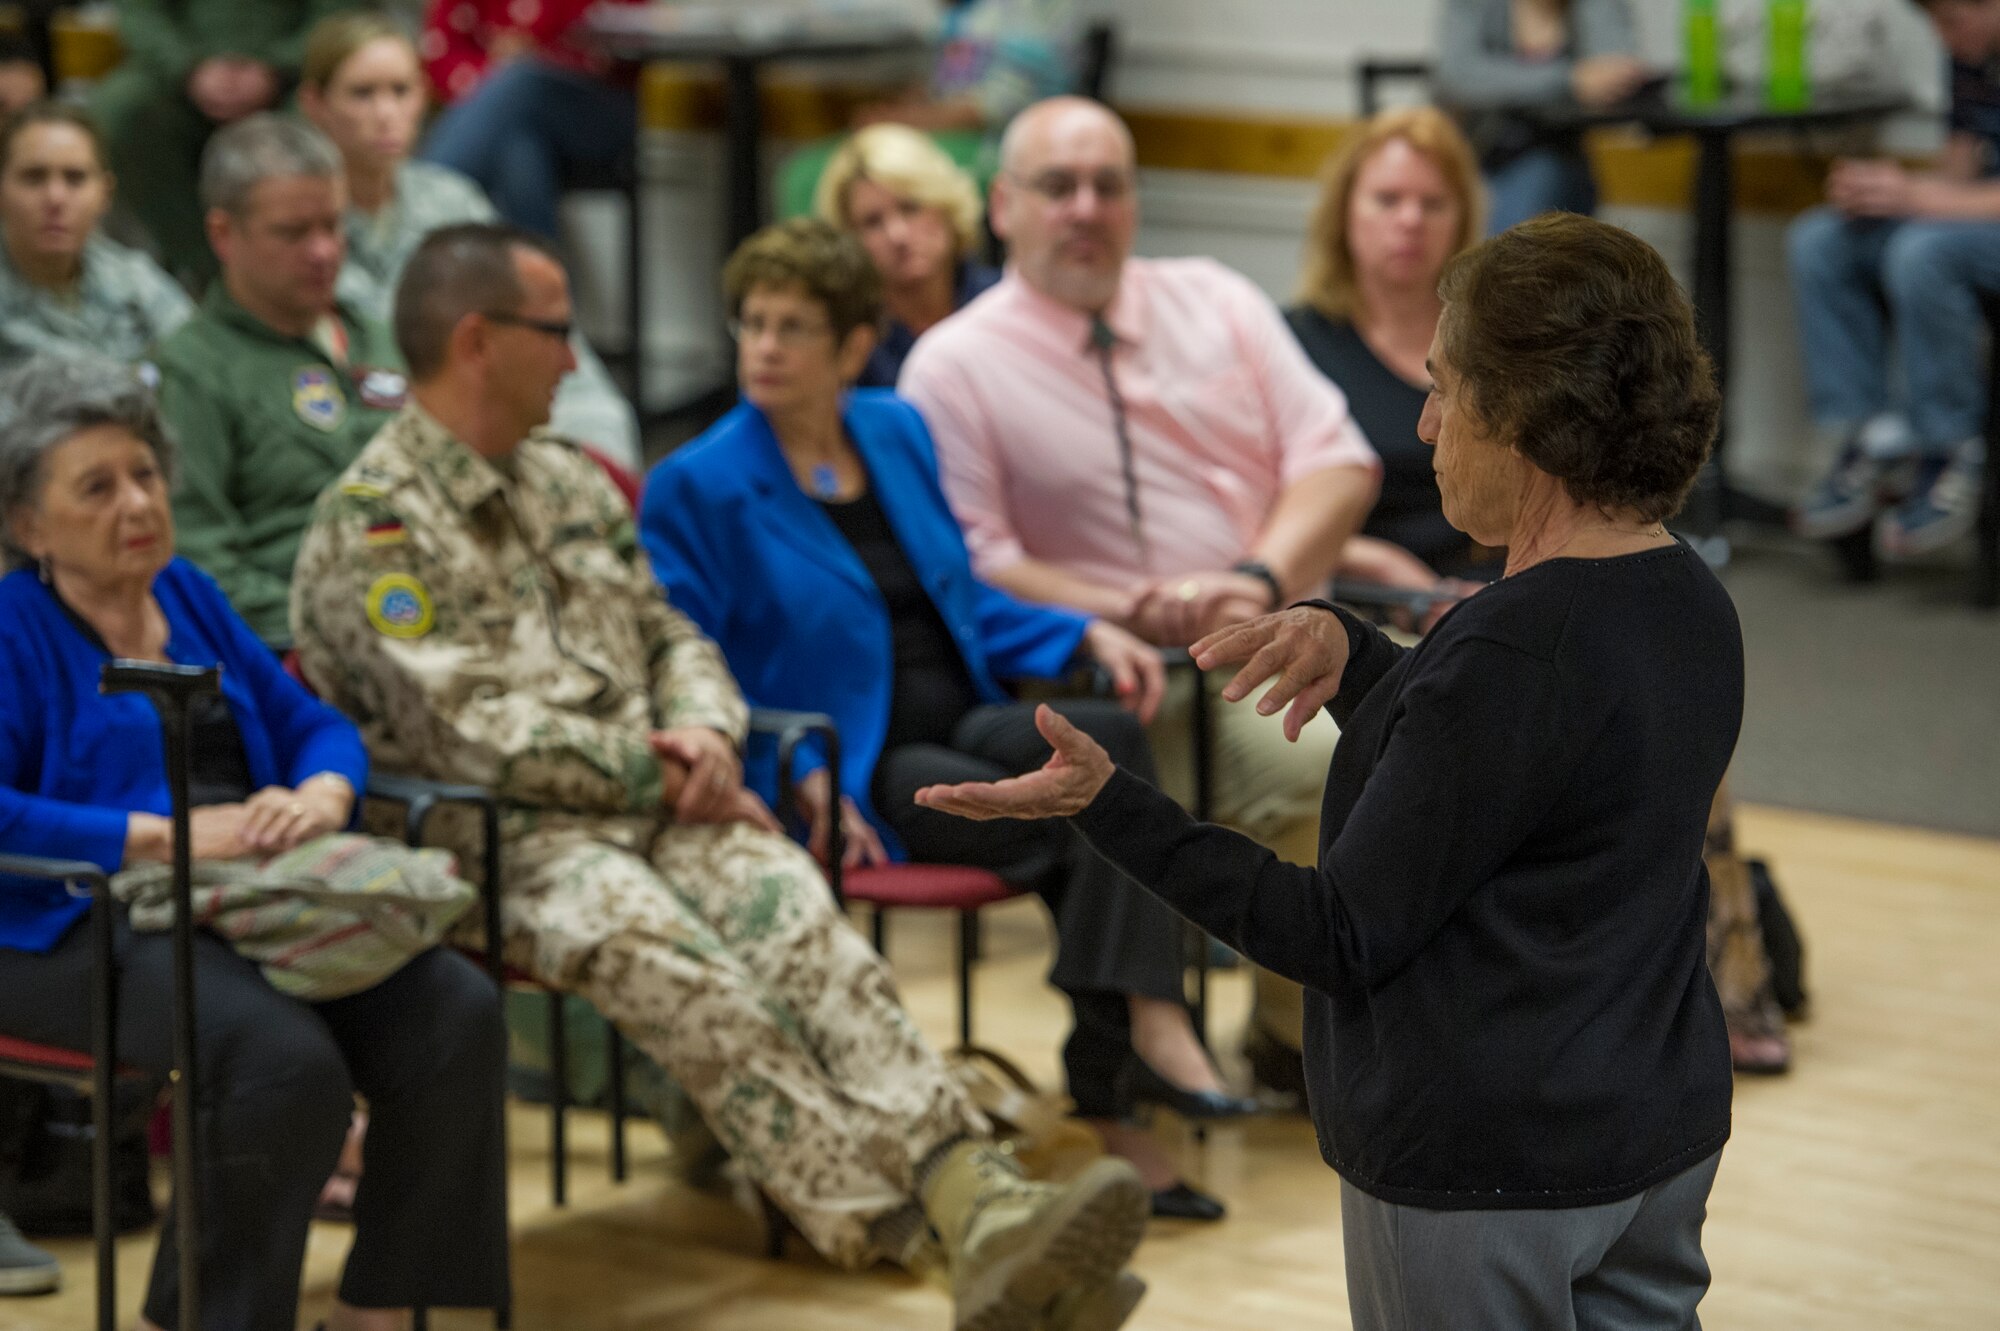 Theresa Dulgov, Holocaust survivor, informs a group of military members and students about her experience living through the Holocaust during the Holocaust day of remembrance at Holloman Air Force Base, N.M., April 21, 2015. Dulgov was invited by the German Air Force Flying Training Center and Holloman and was happy to have the opportunity to tell her story as she believes it will serve a large part in Holocaust education. “I think it’s marvelous because, I don’t think that younger people really understand what it was like living through the Holocaust. I need them to see and believe that this is what really happened, and to educate them about this tragedy,” said Dulgov. (U.S. Air Force photo by Airman 1st Class Aaron Montoya / Released)